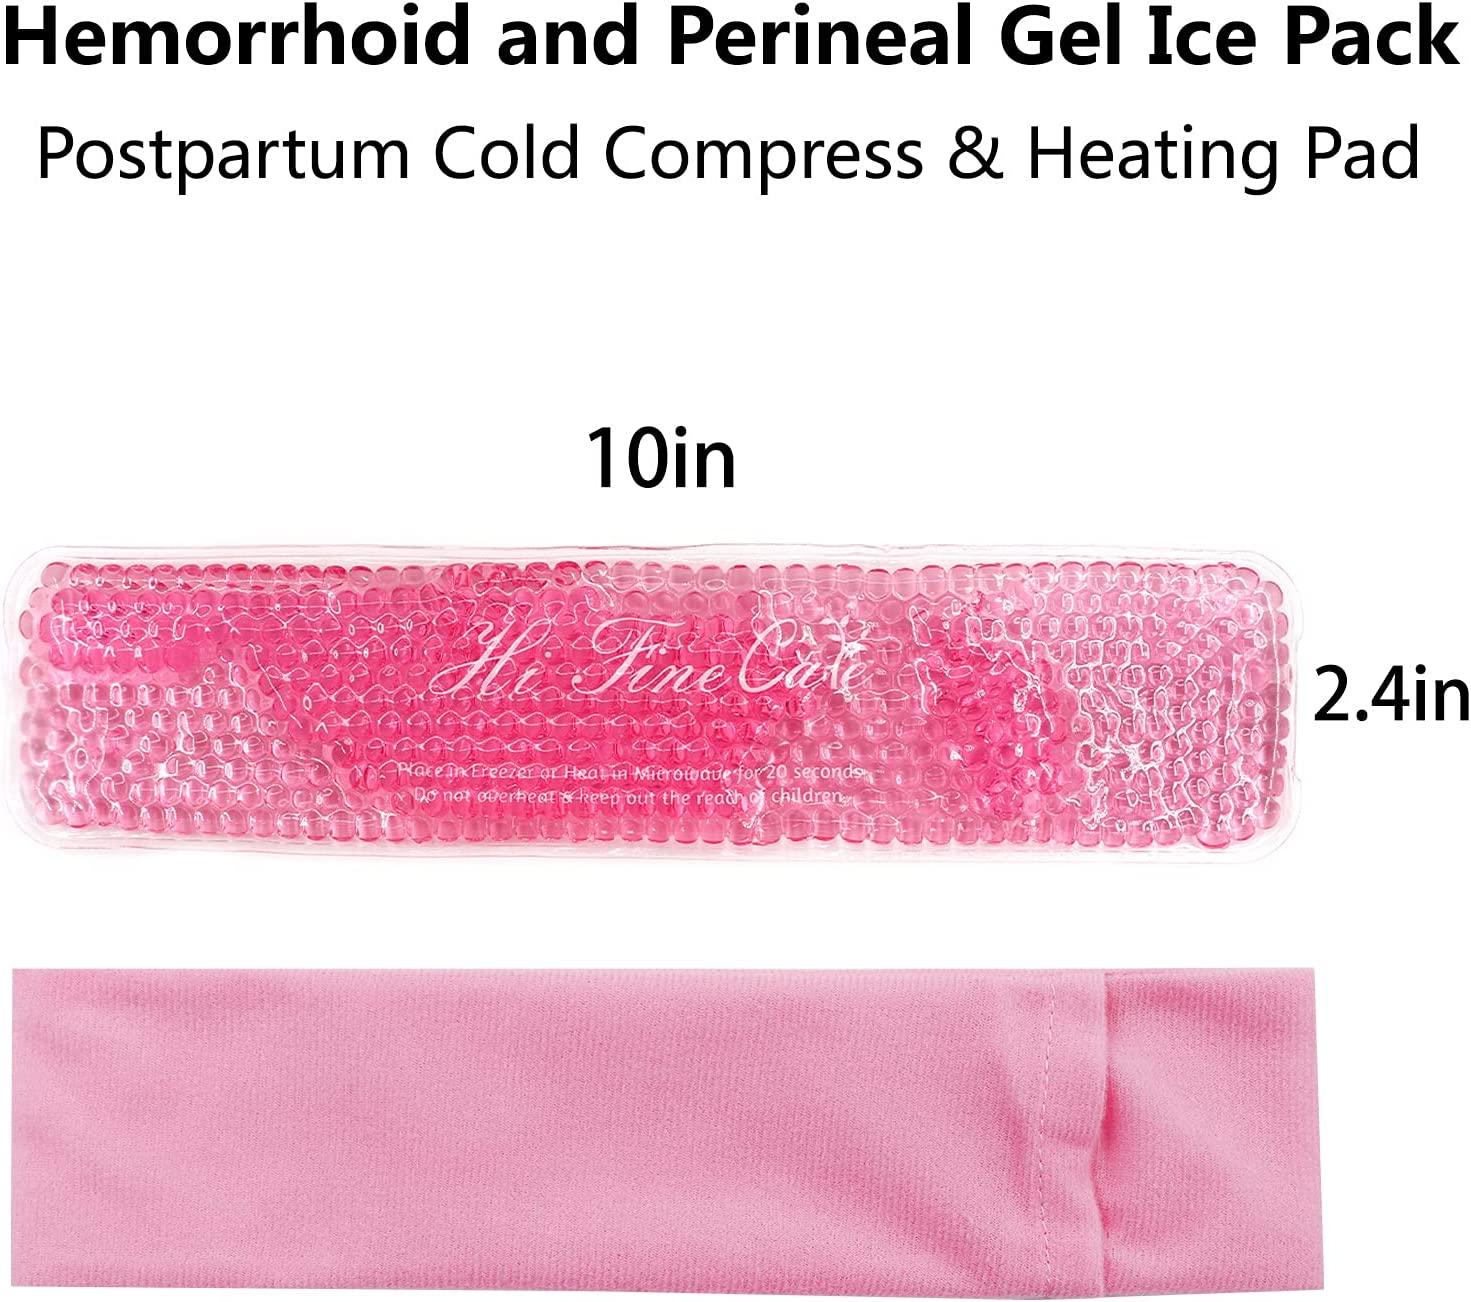 Reusable Perineal Cooling Pad, Perineal Cold Packs, Postpartum and  Hemorrhoid Pain Relief, Hot & Cold Packs for Women After Pregnancy and  Delivery(2 Pcs+3 Washable Sleeves/10X2.4in) #1